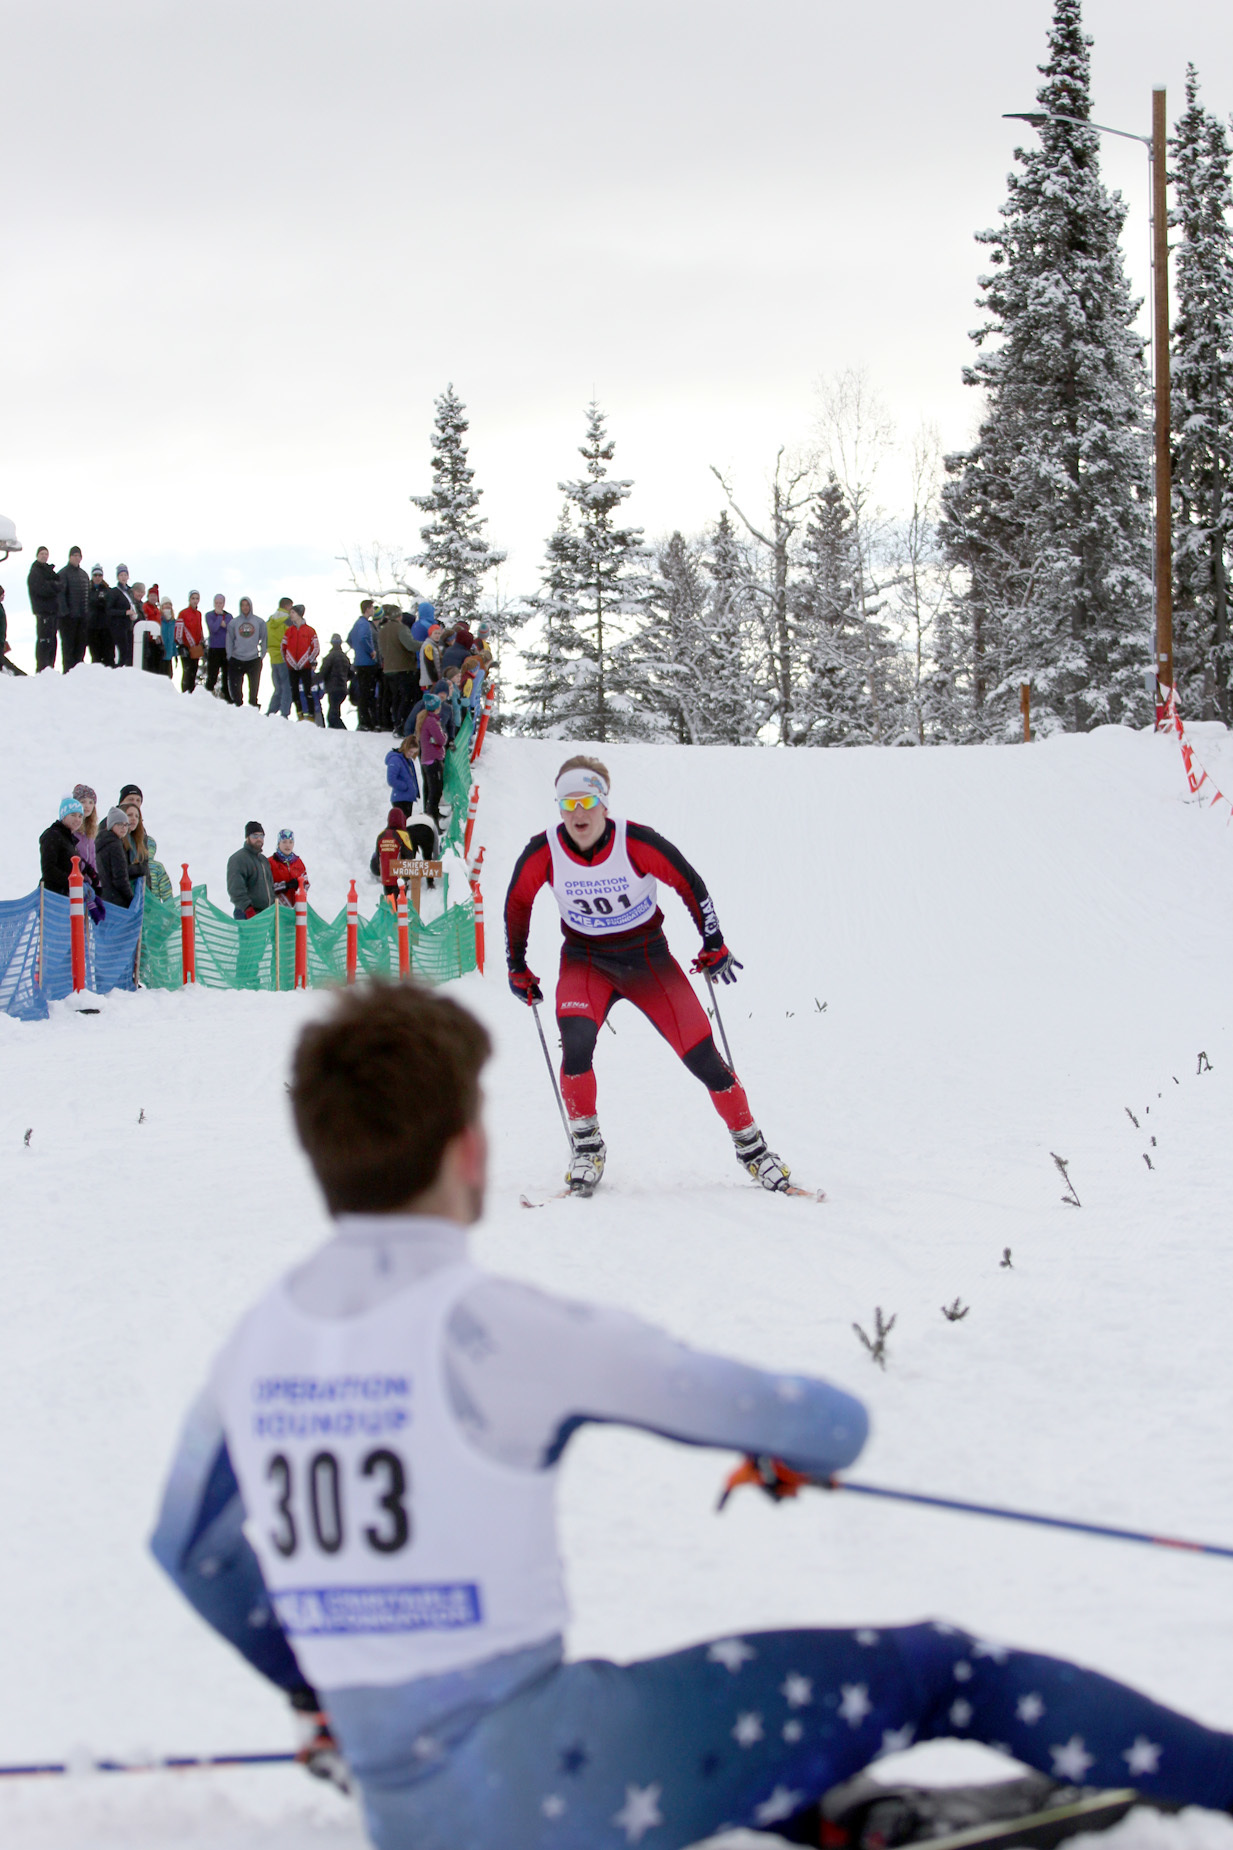 Kenai Central’s Karl Danielson skis on Saturday at Government Peak in the Region III ski meet. (Photo by Caitlin Skvorc/For the Frontiersman)